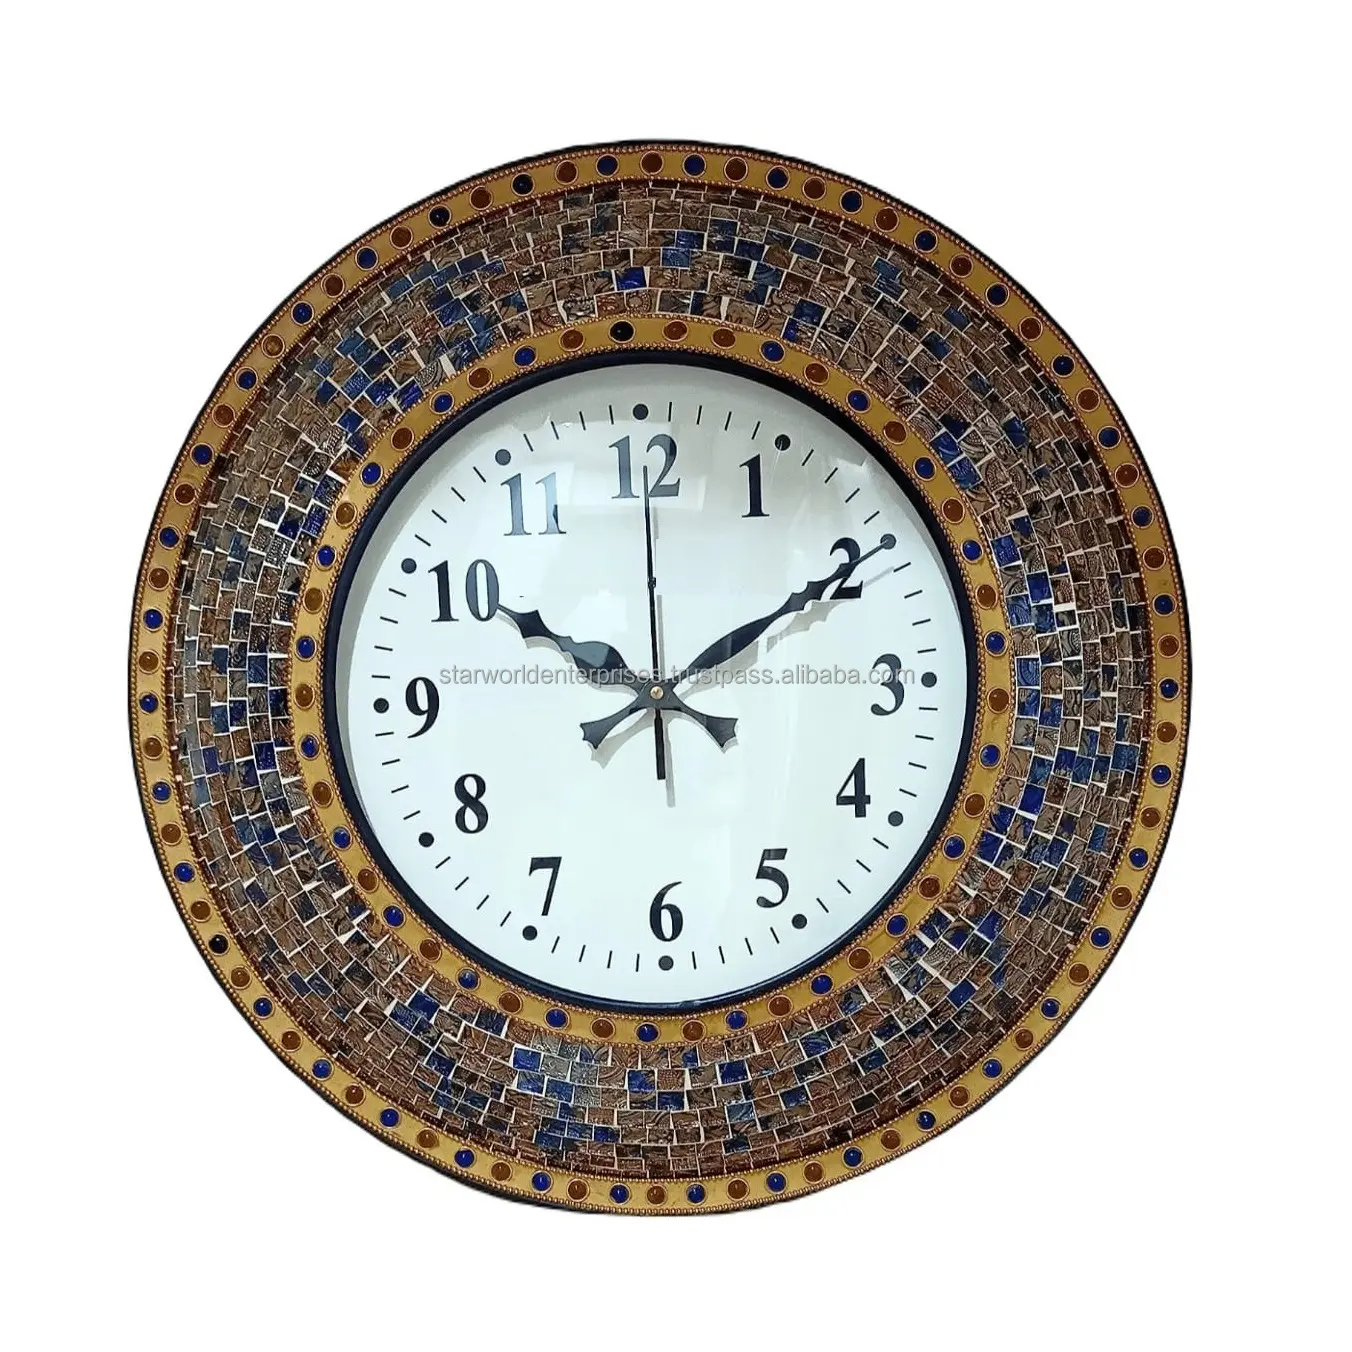 Standard Quality Round Shape Metal Wall Clock for Time Use and Wall Decoration Available at Affordable Price